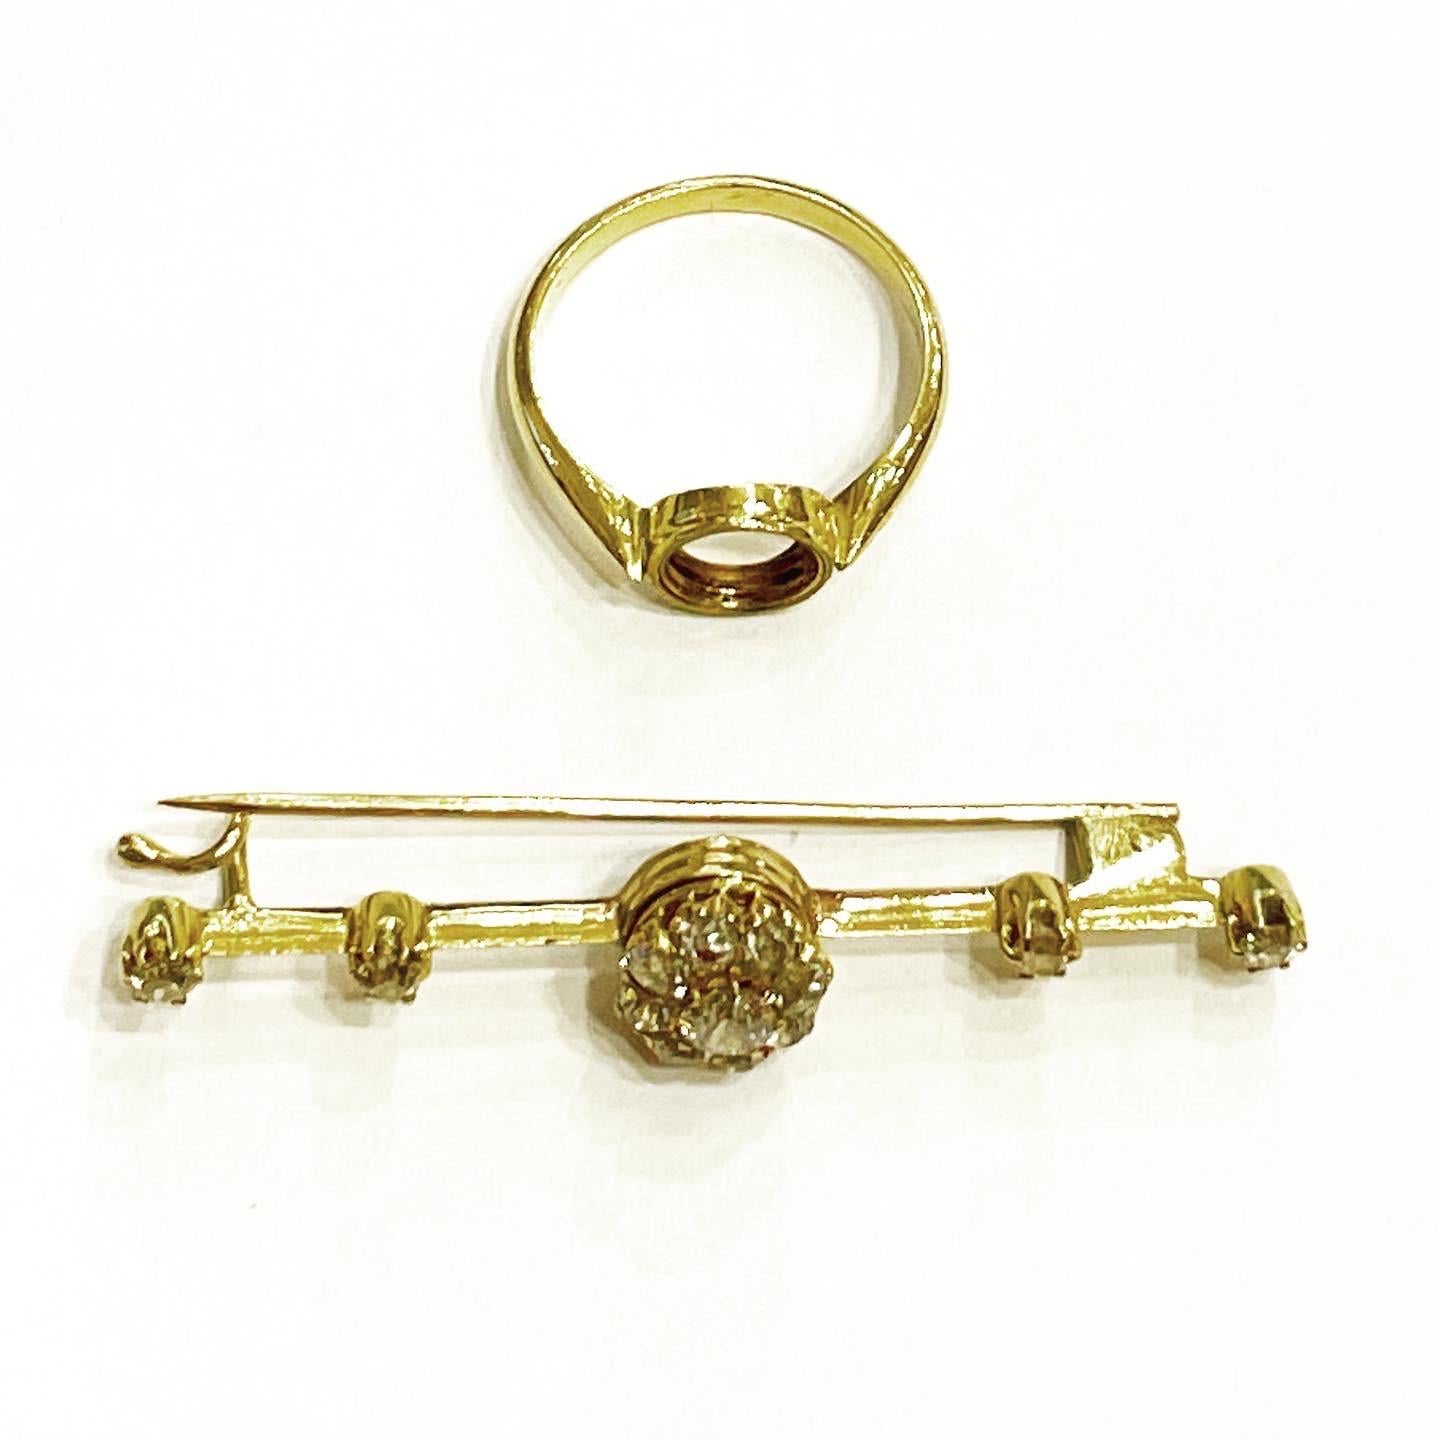 Original and amazing 19th century french set composed by a ring and a brooch. 
The diamond rosette is removable with a screw and interchangeable from the ring to the brooch.
Old european diamond cut and  18k yellow gold.
A gorgeous design, it could